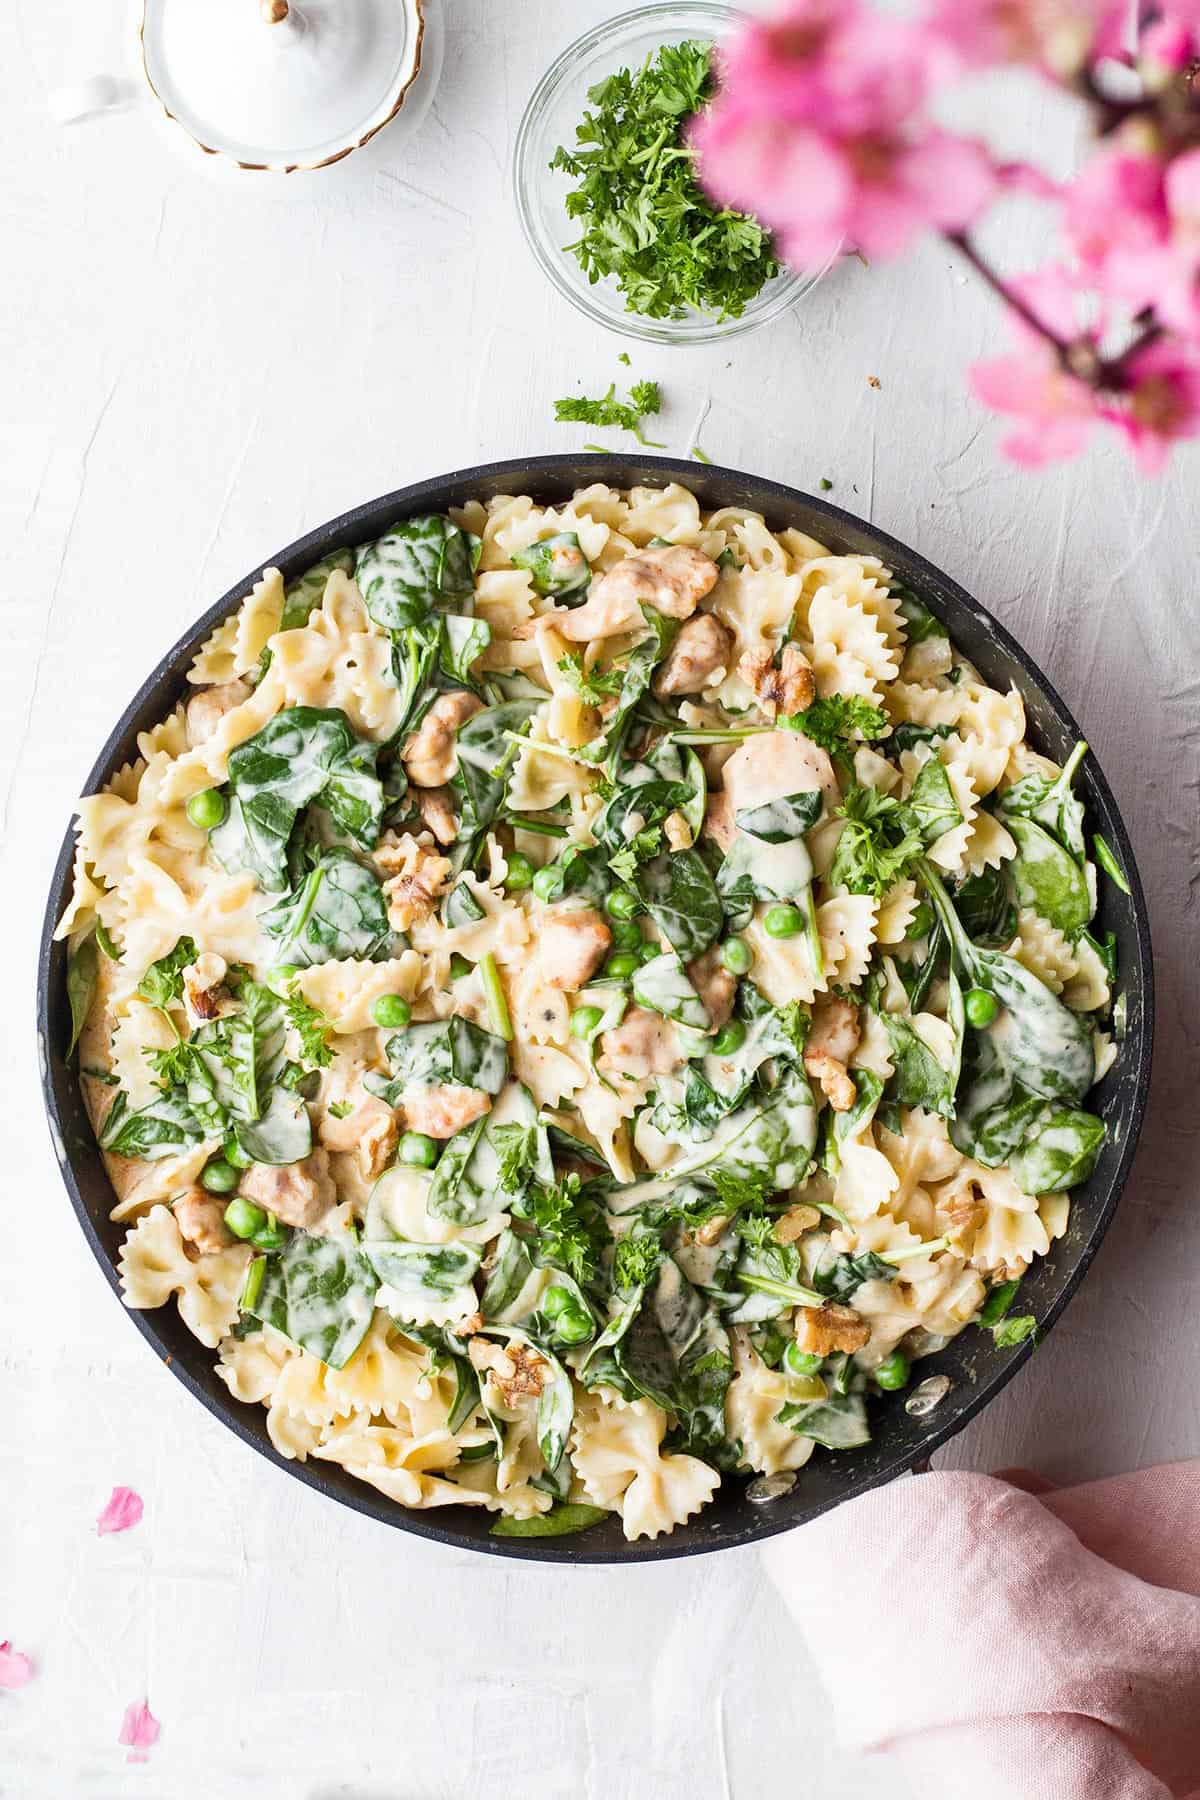 Skillet with pasta, peas, spinach and a cream sauce, seen from above.